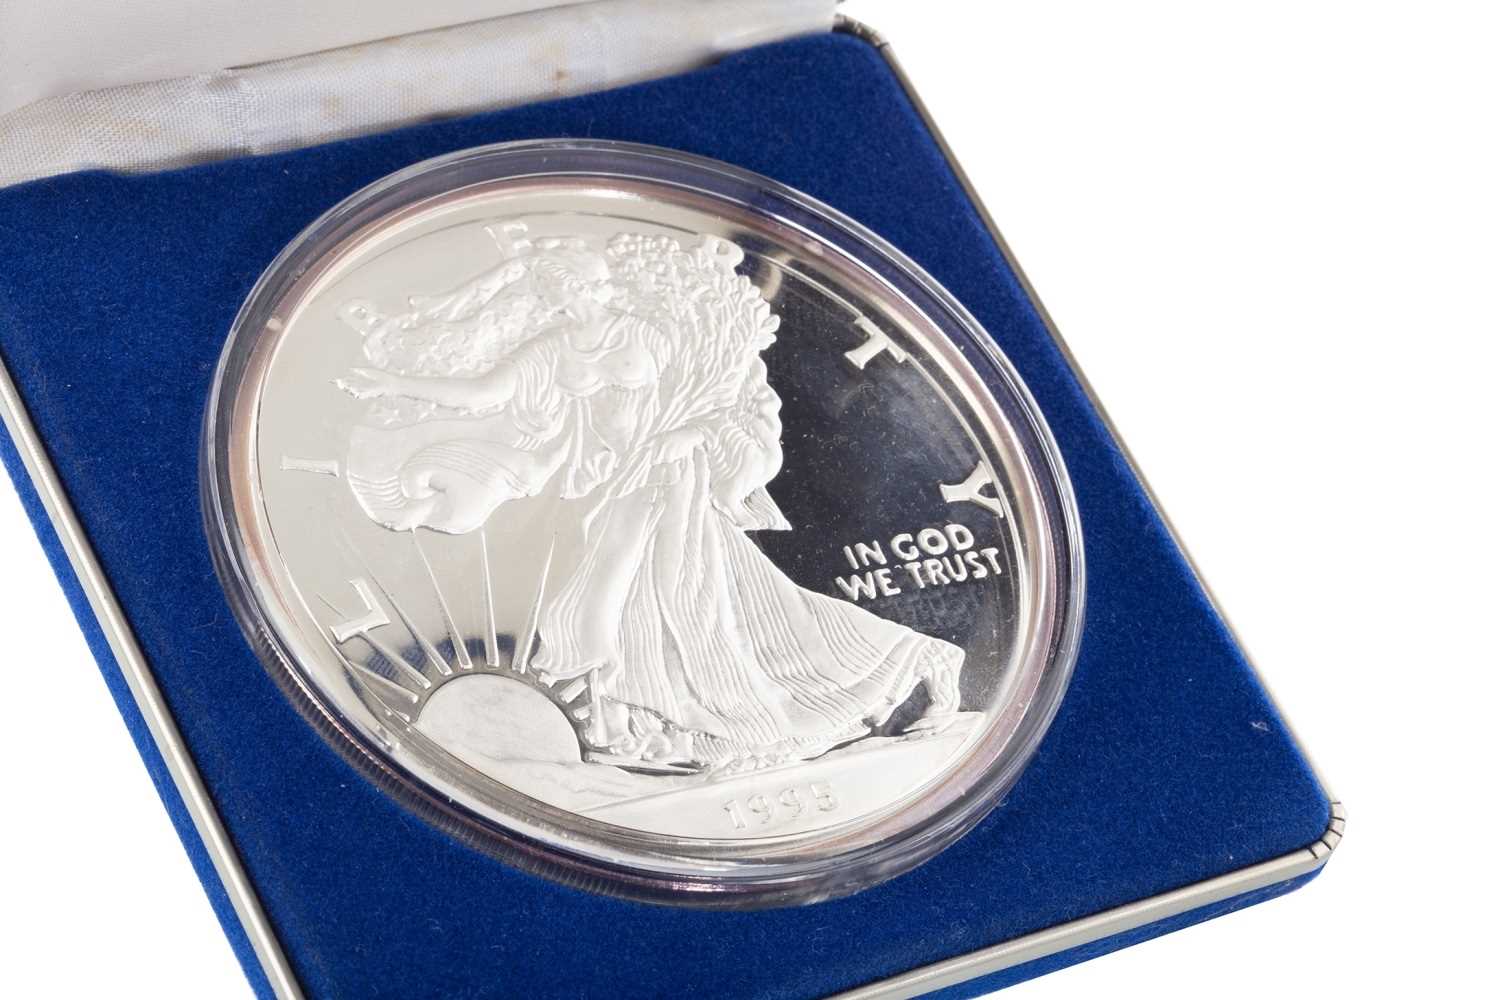 Lot 557 - A SILVER THE GIANT AMERICAN EAGLE SILVER PROOF COIN